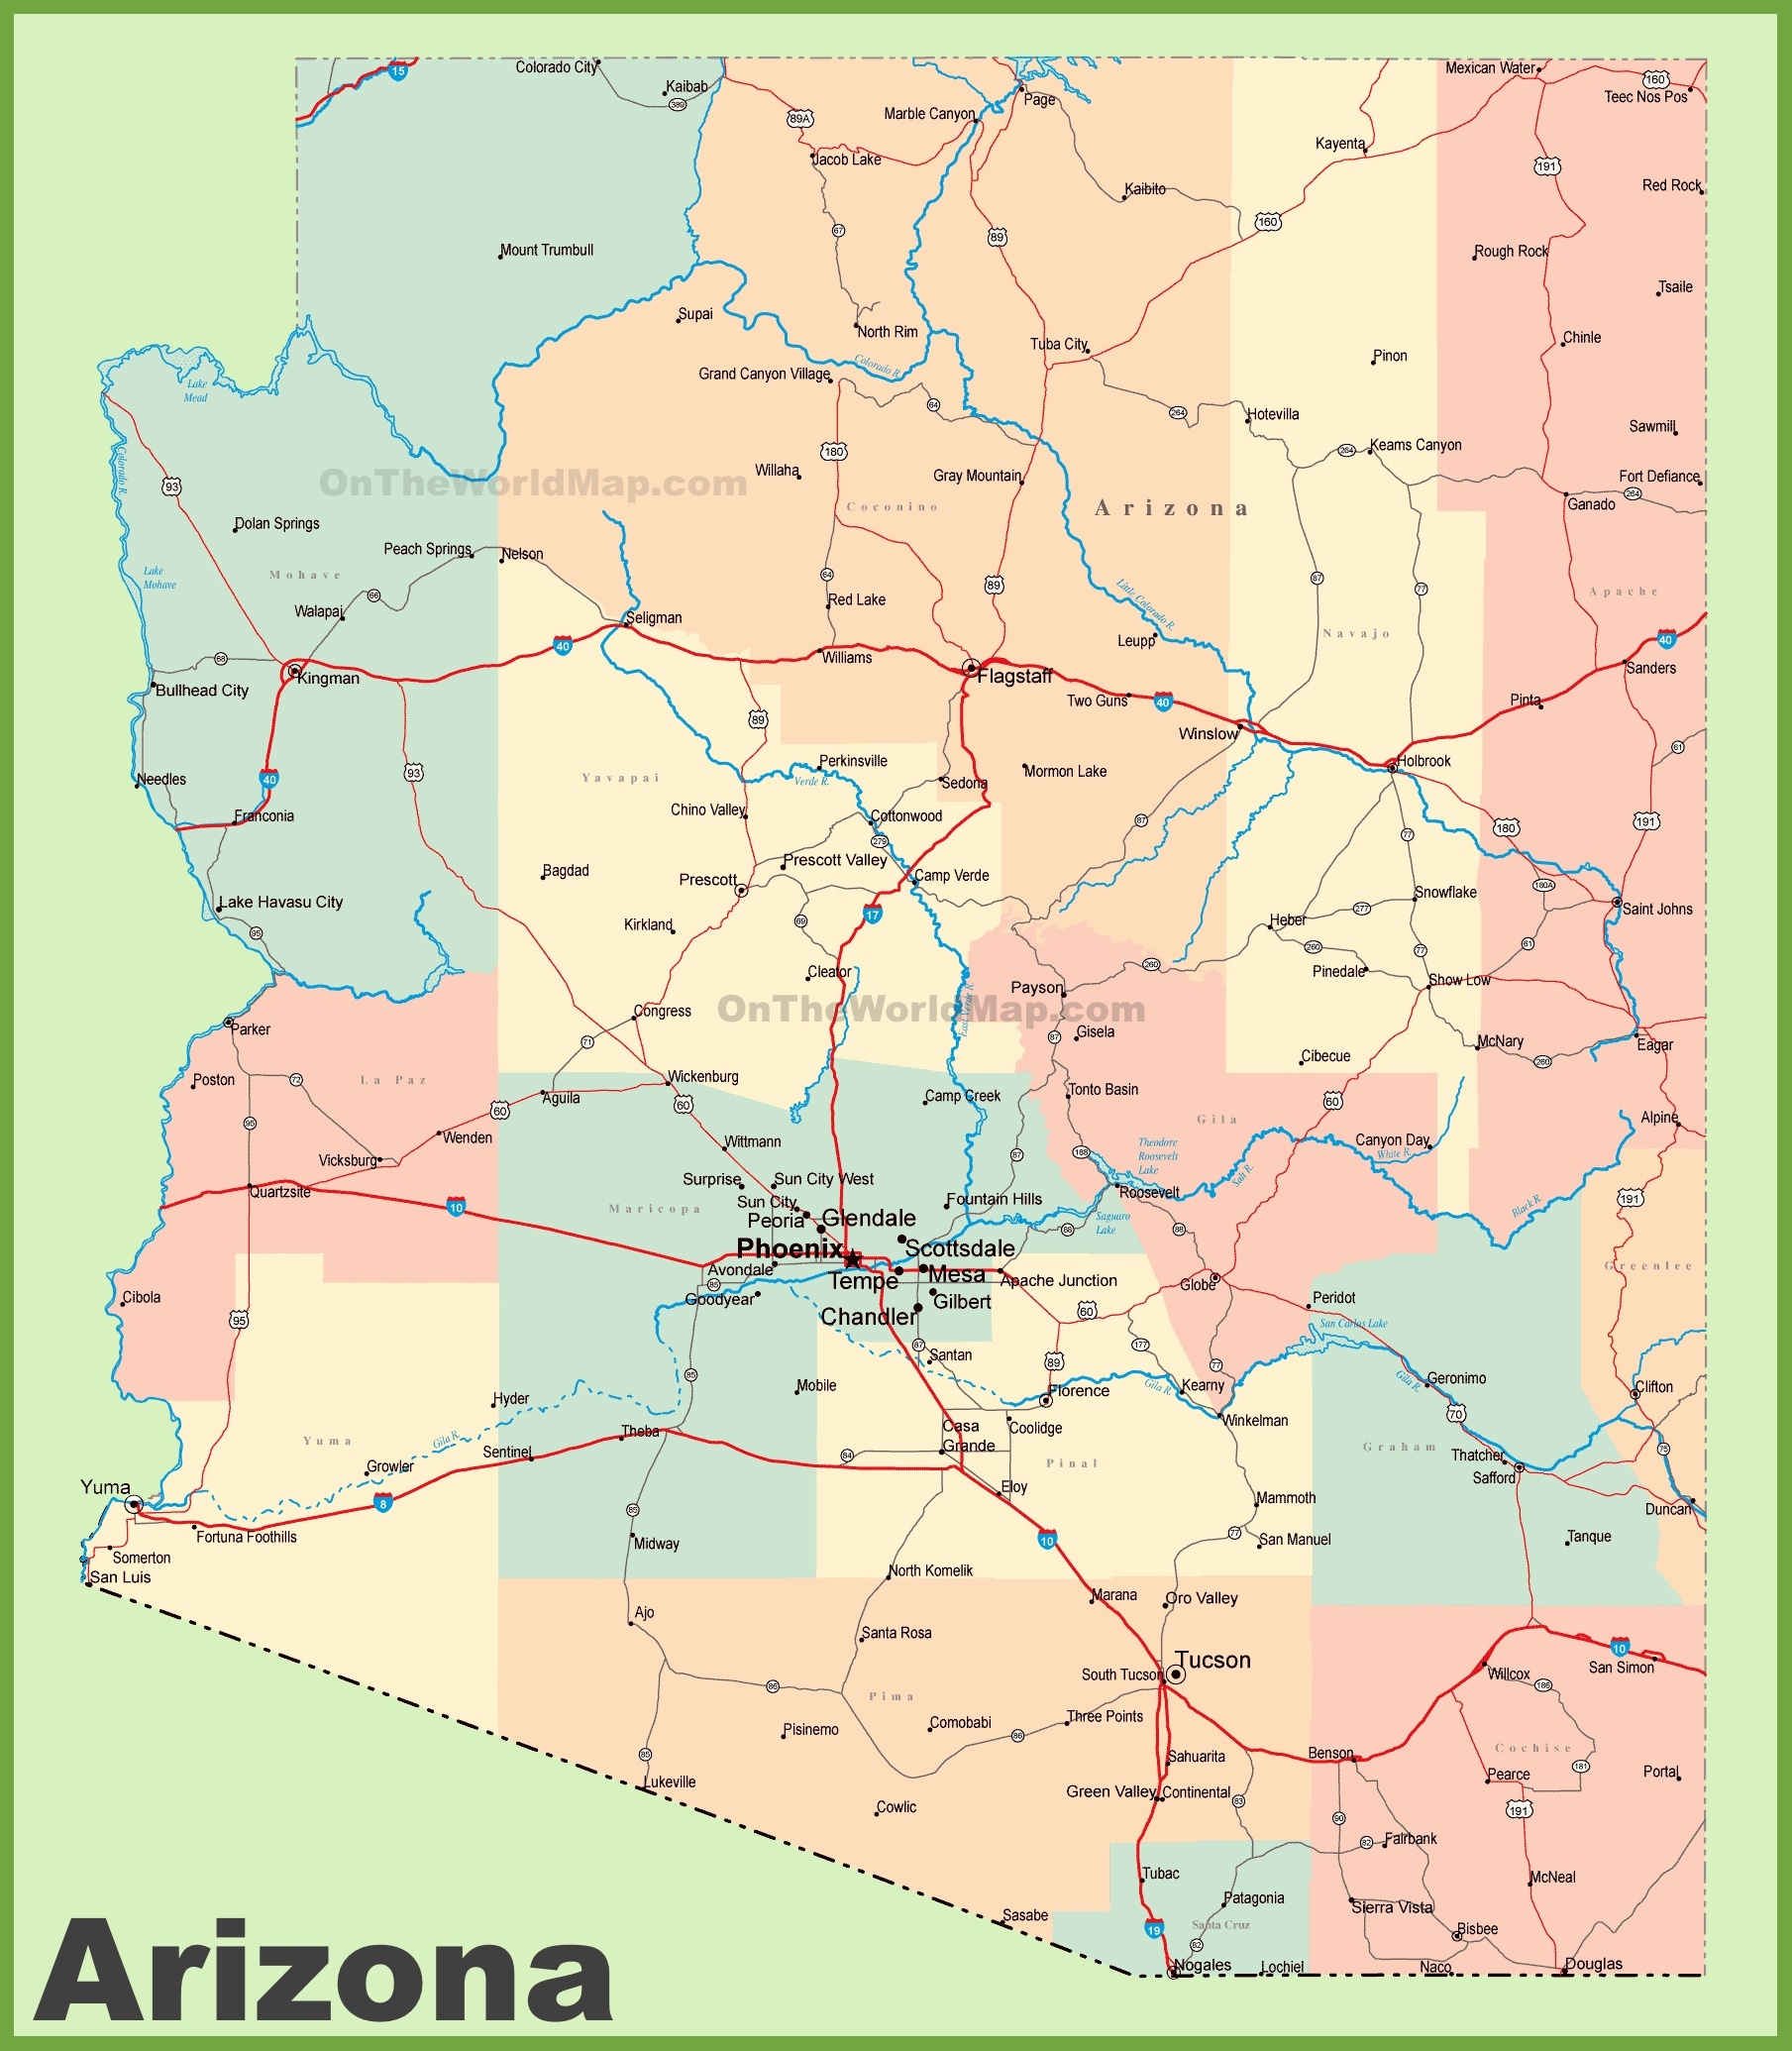 Arizona Road Map With Cities And Towns - Free Printable Map Of Arizona